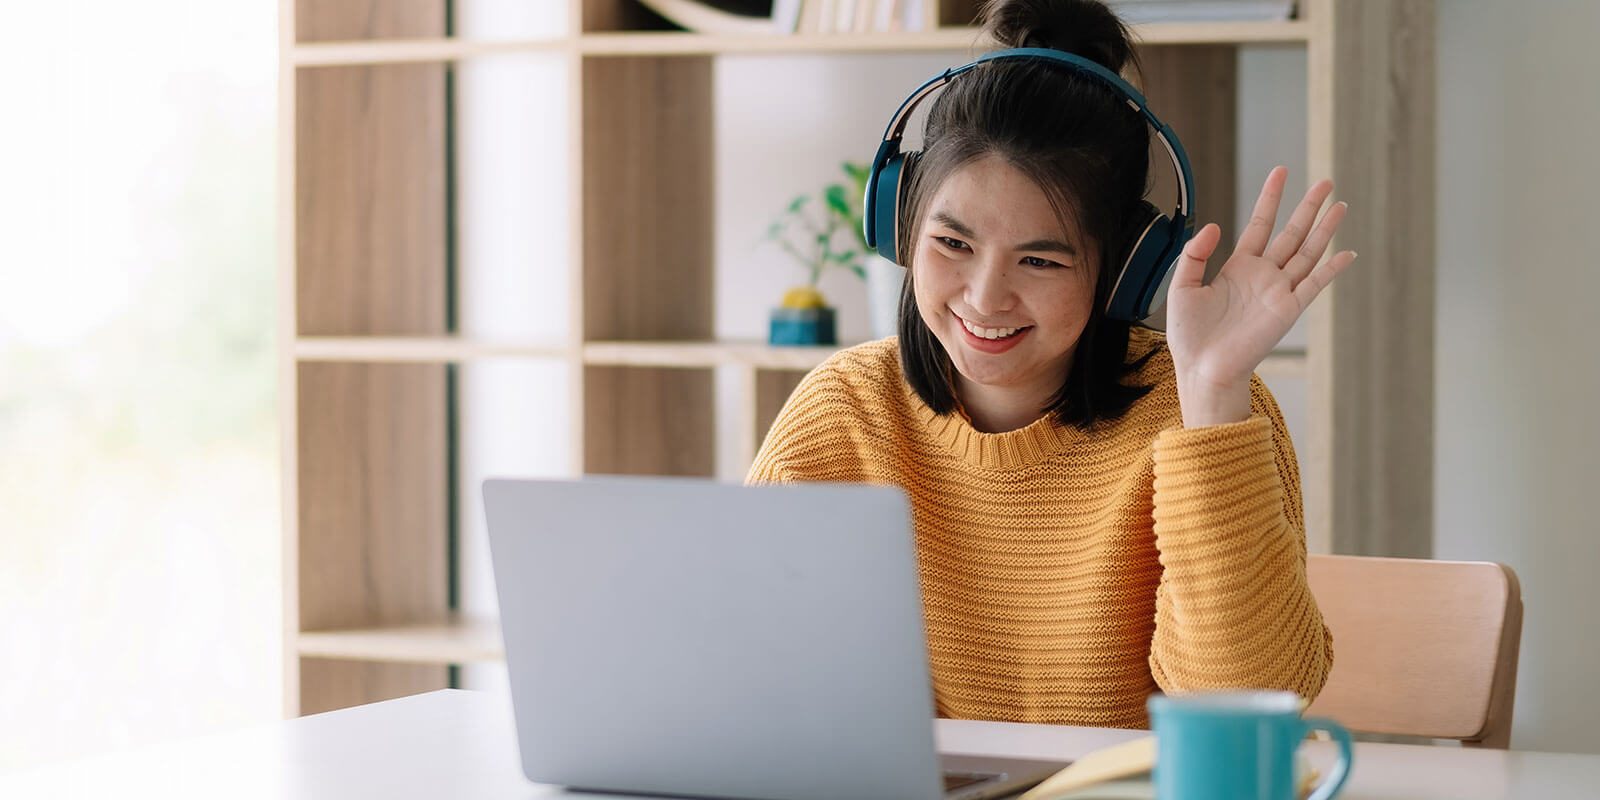 Female student wearing headphones is smiling and waving at her computer